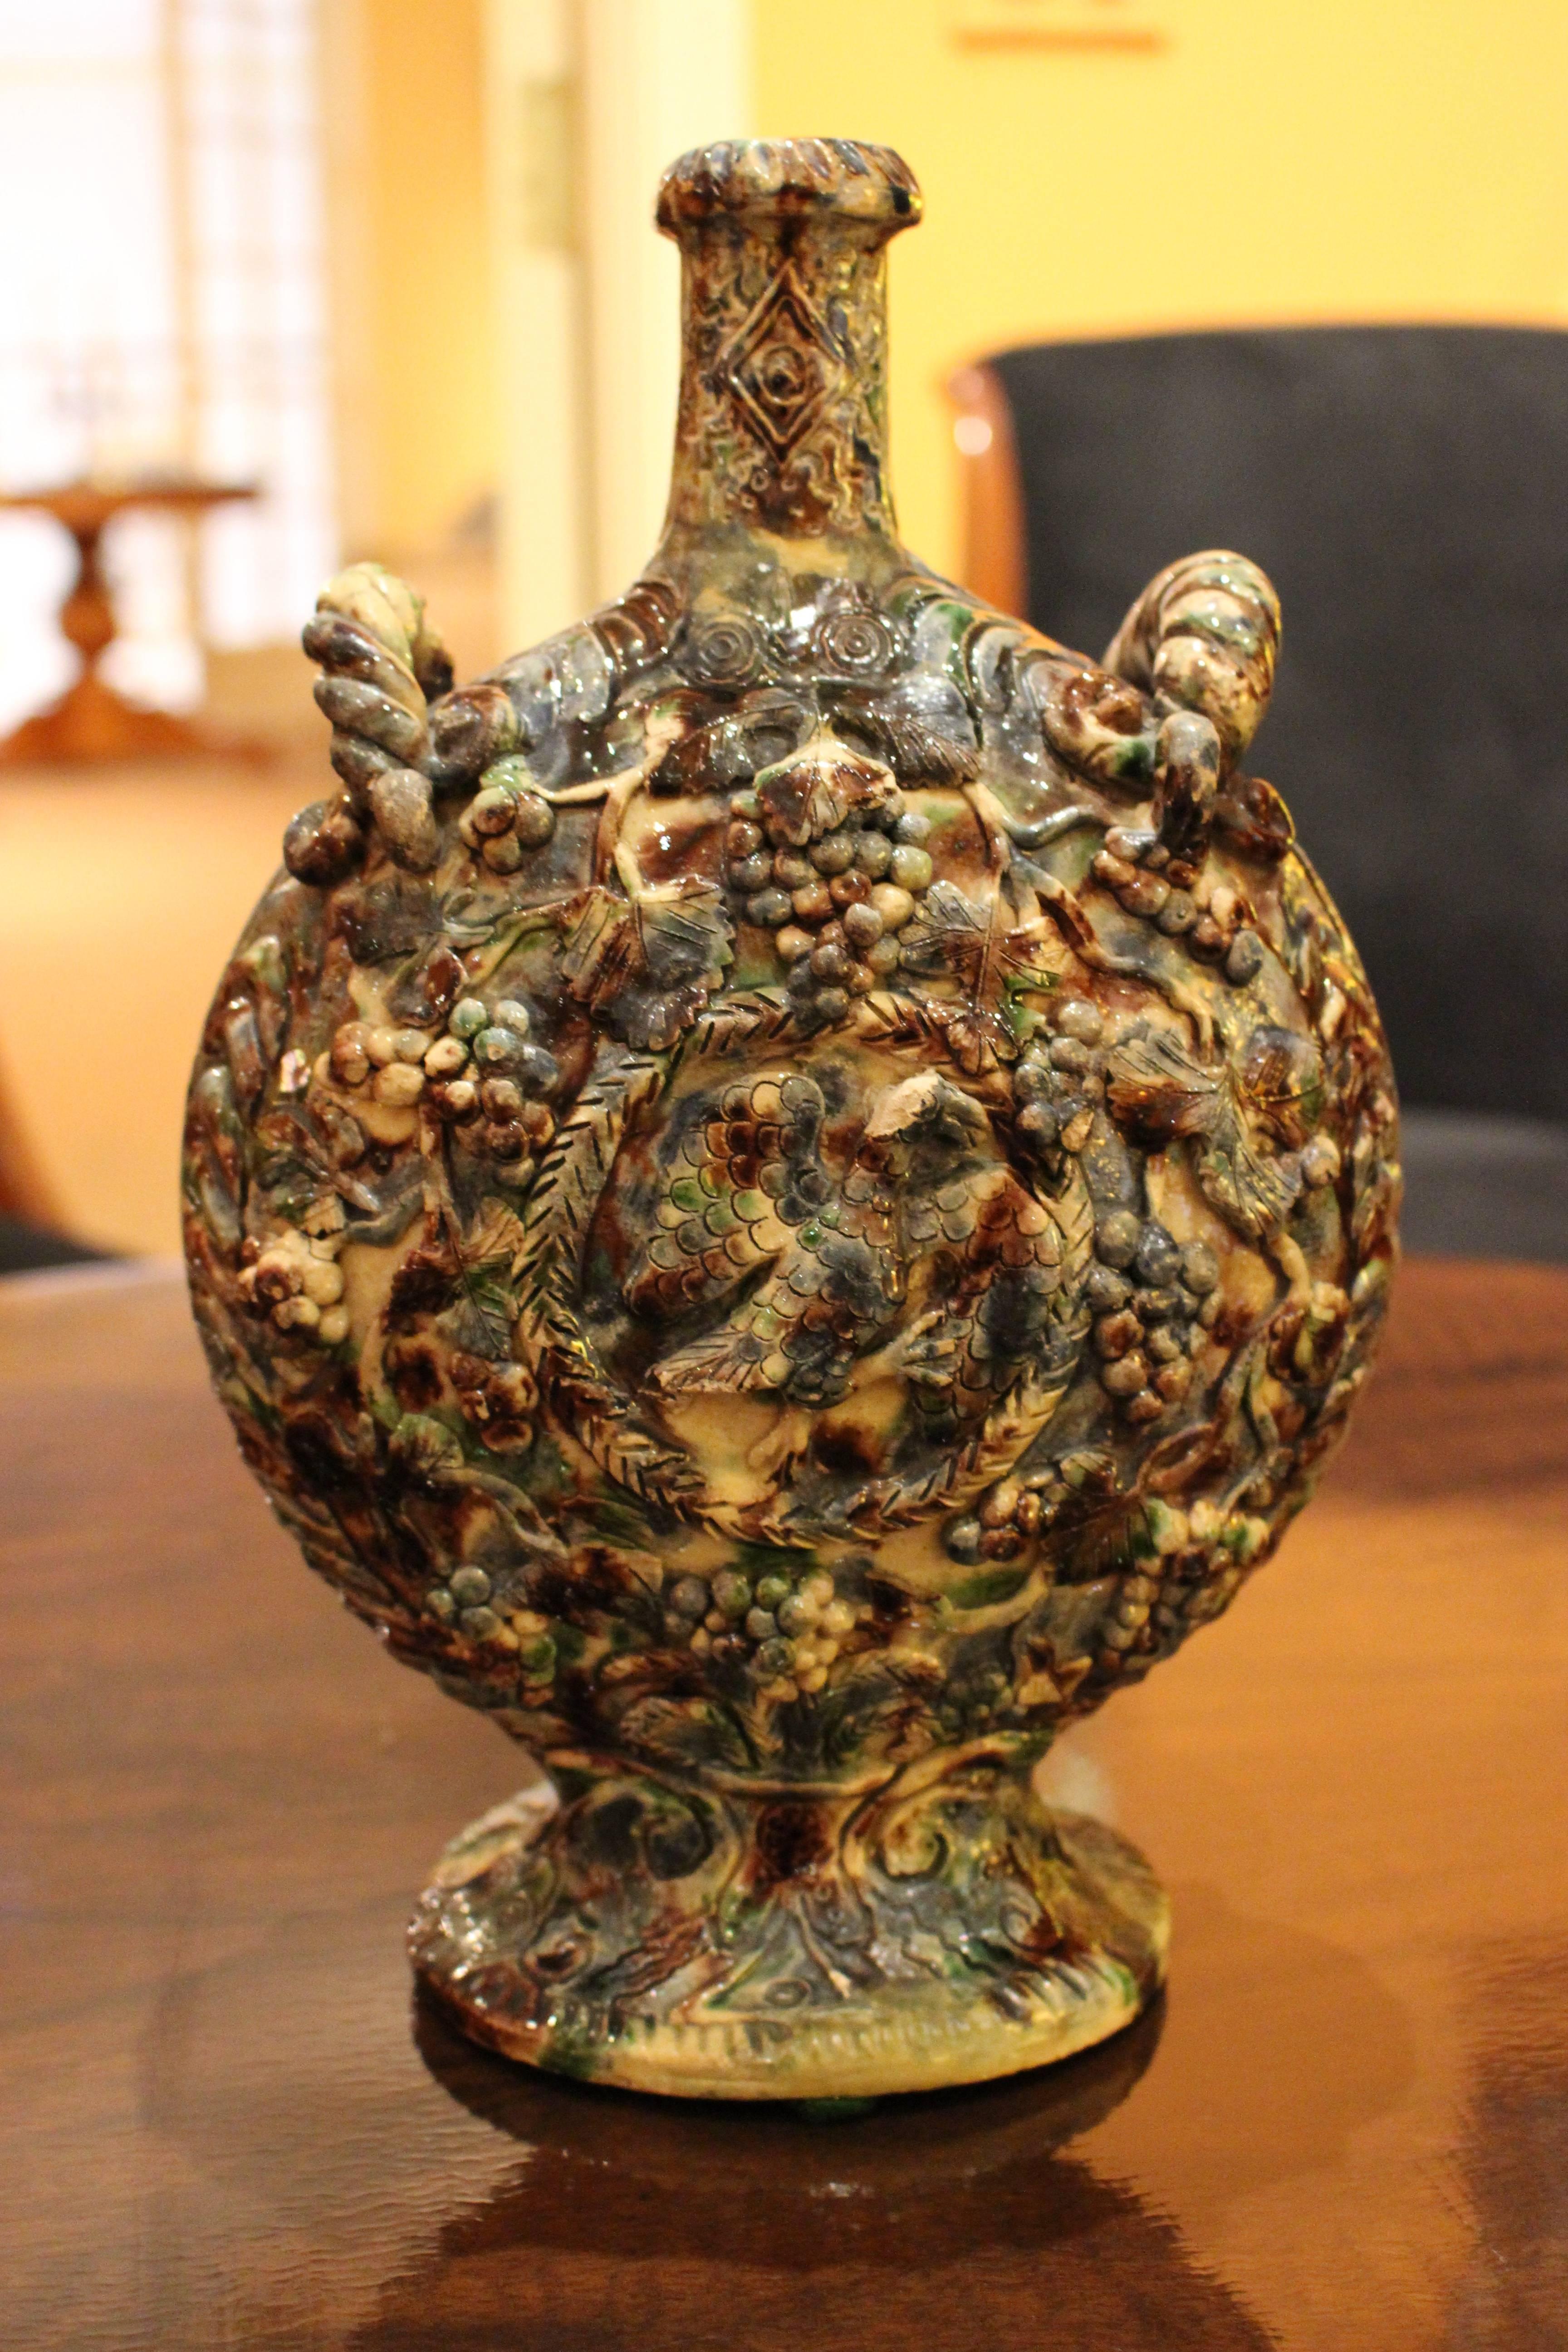 A rustic Italian faience vase molded in relief from the 19th century. The body of flattened circular form is topped by a tall cylindrical neck with a flaring rim flanked by rope-like handles. Molded in relief overall, each side is decorated with the